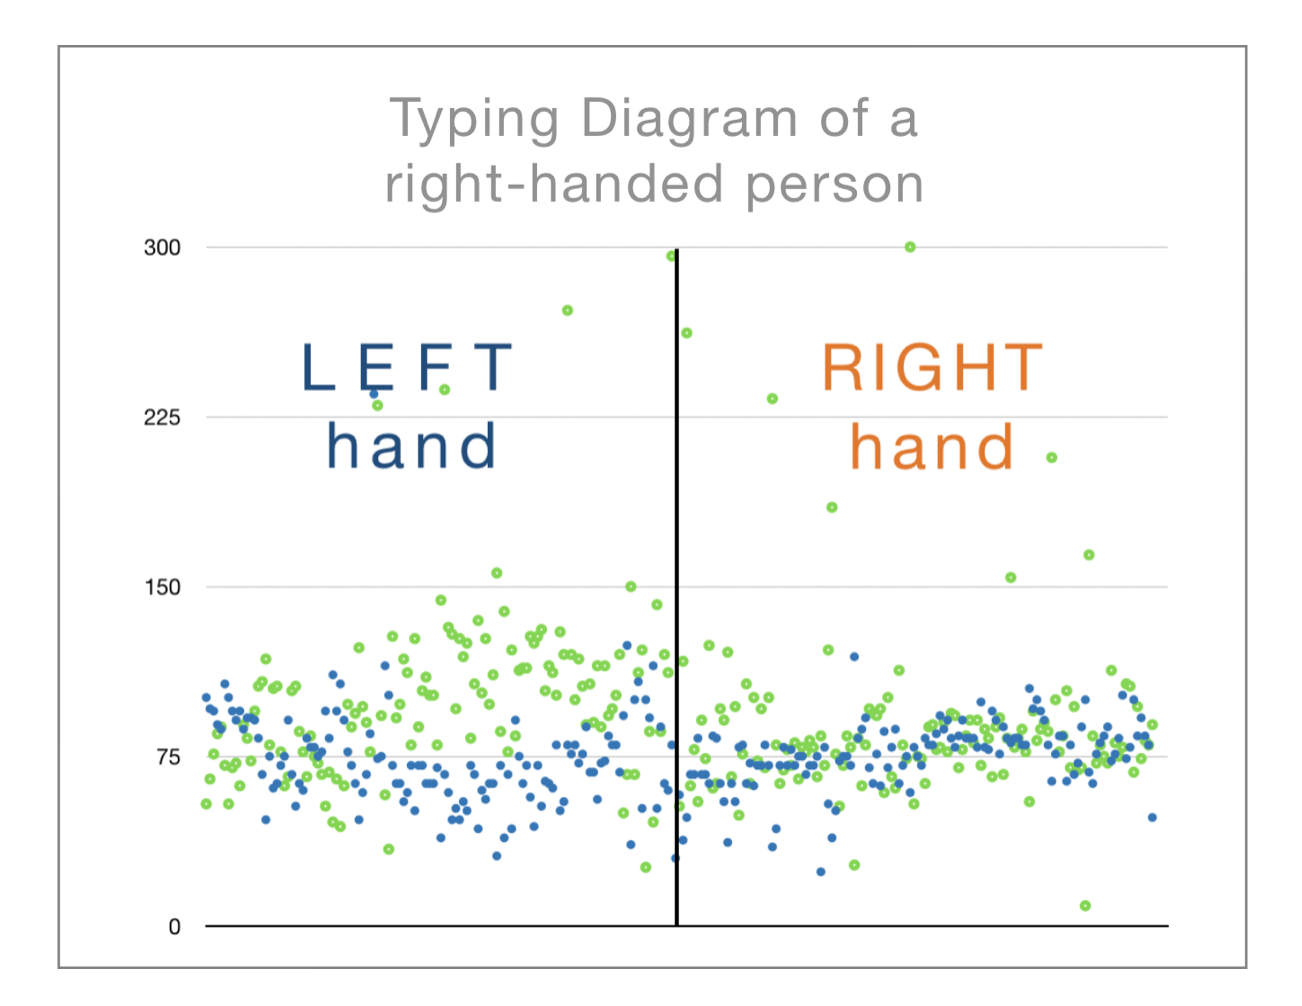 Typing biometrics diagram of a right-handed person